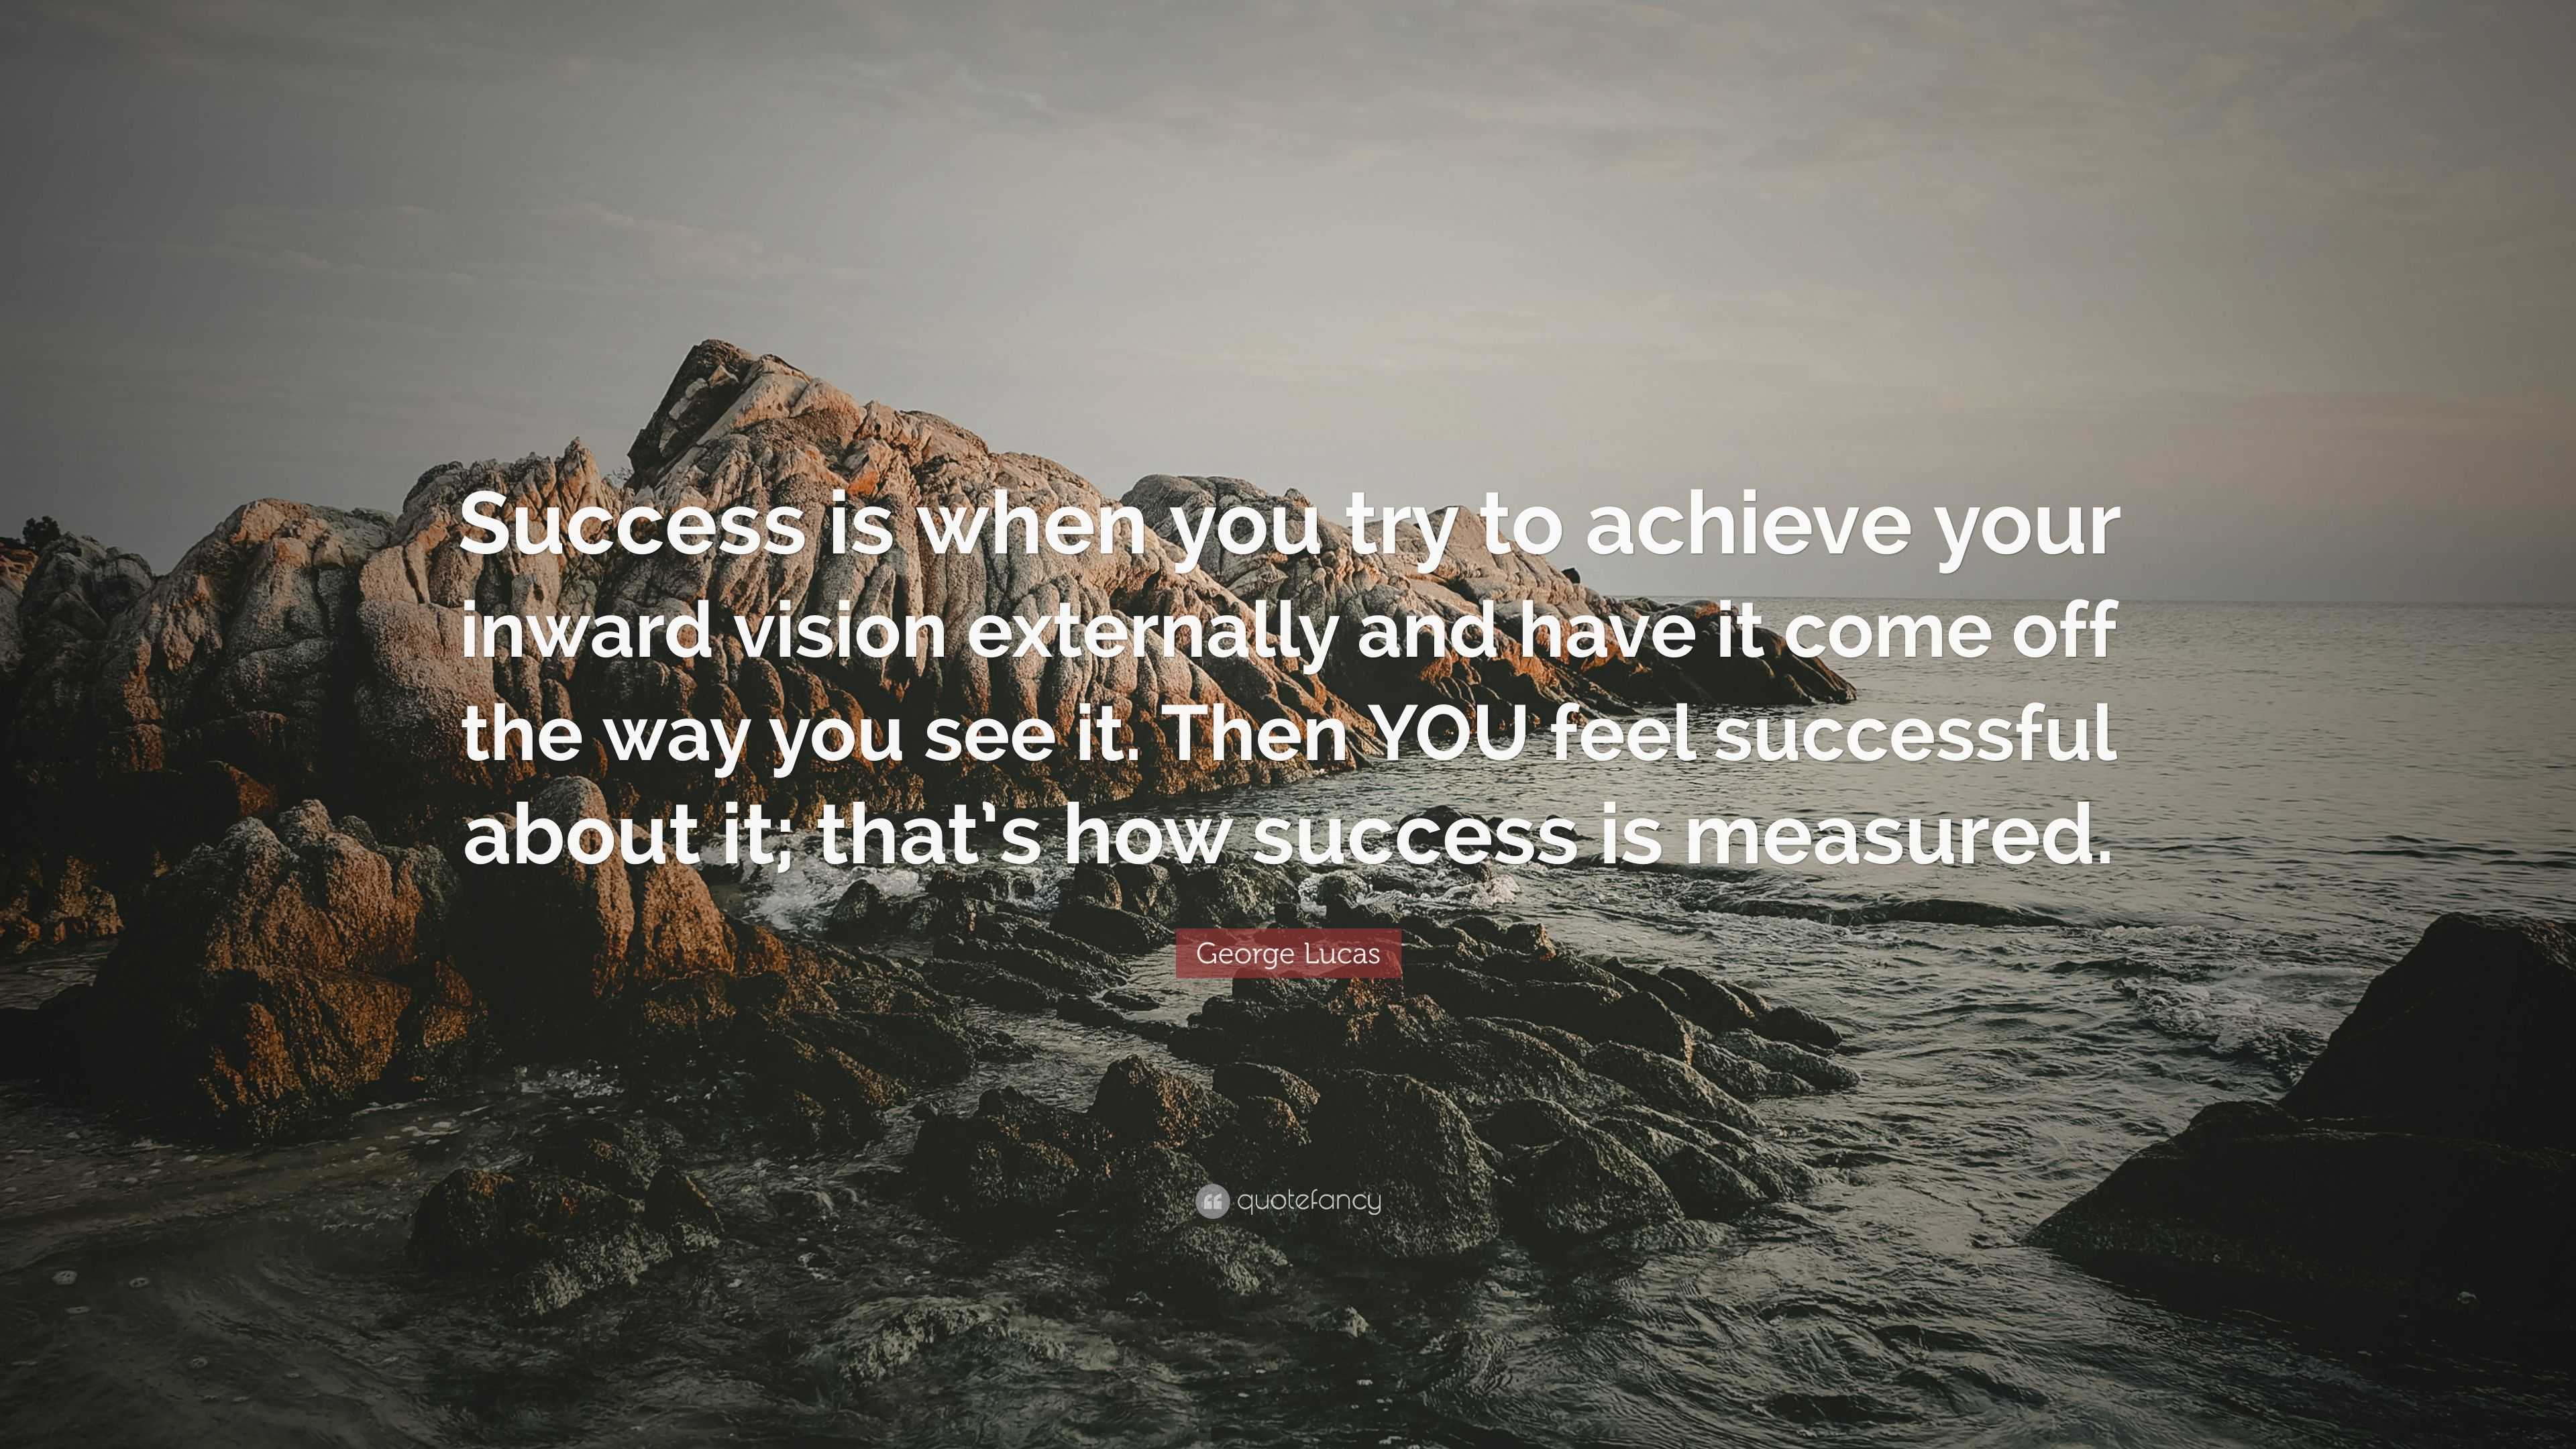 George Lucas Quote: “Success is when you try to achieve your inward